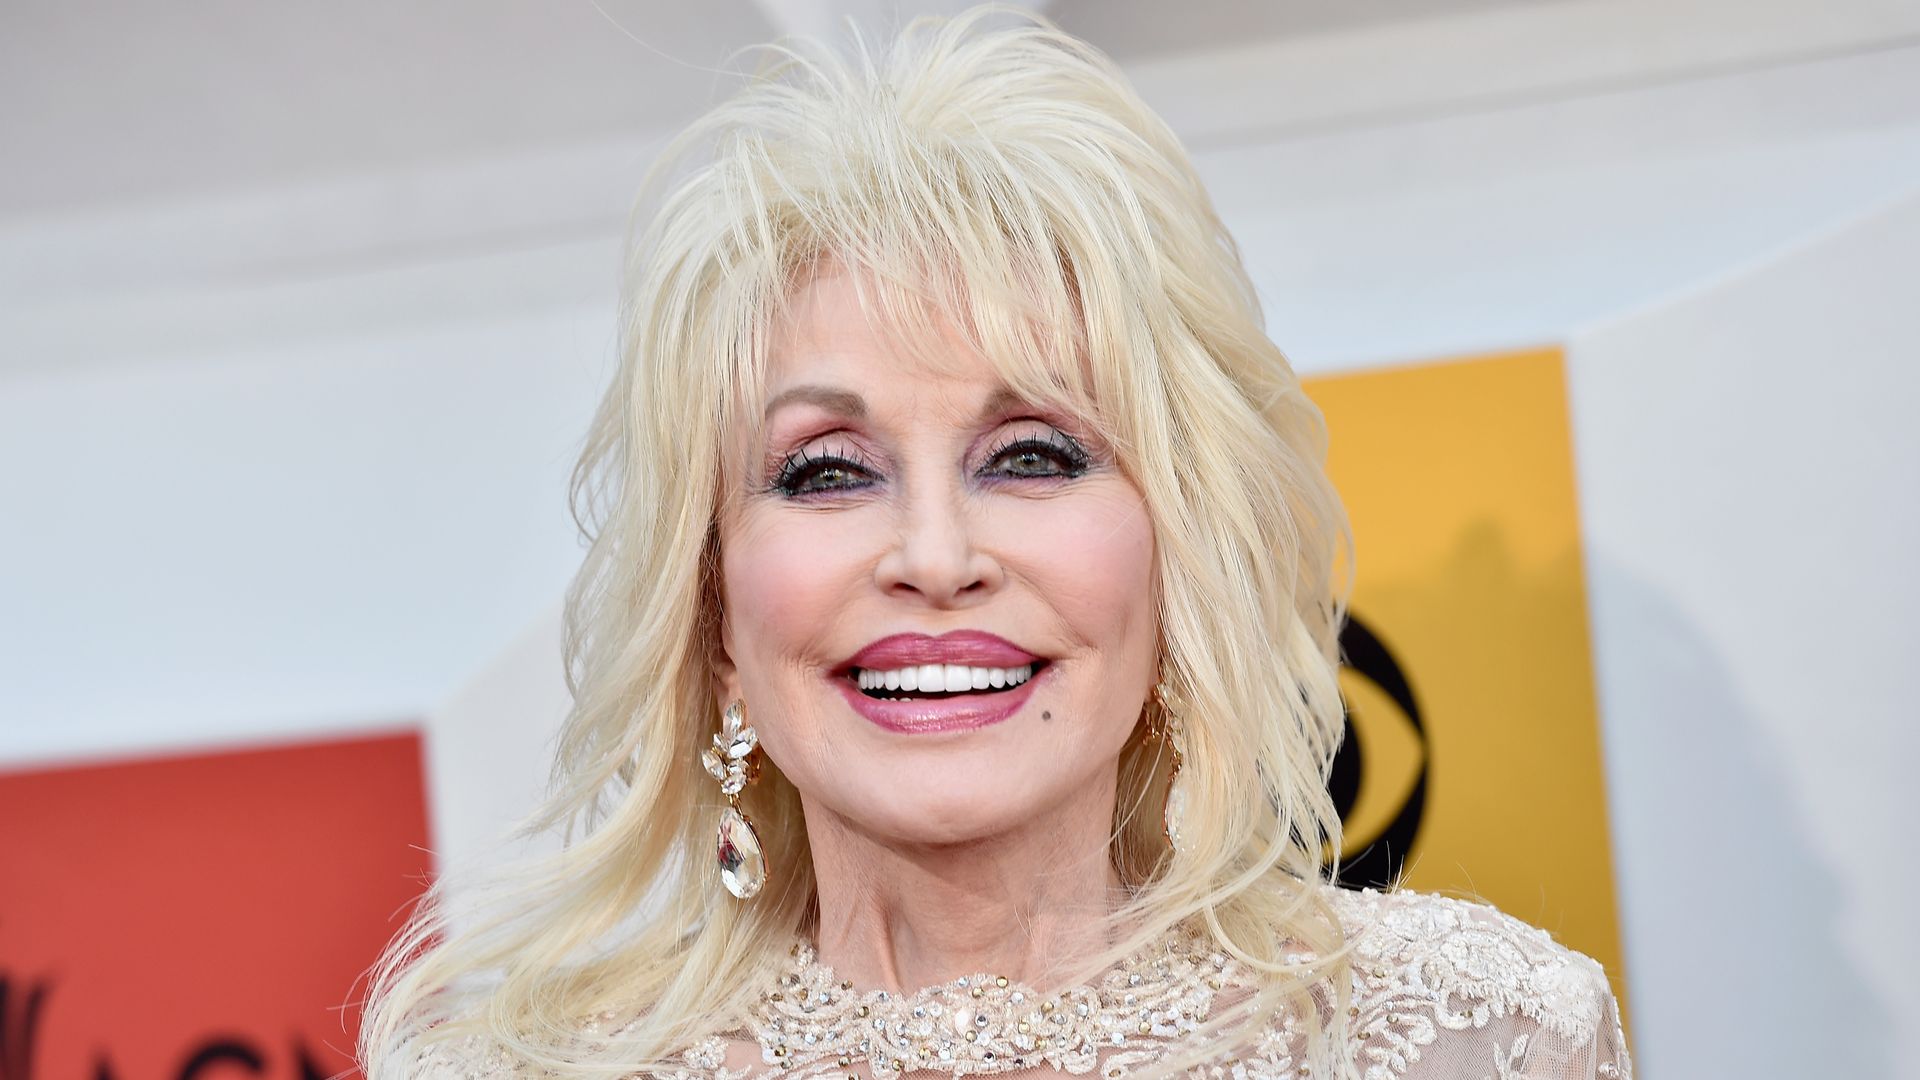 Singer-songwriter Dolly Parton attends the 51st Academy of Country Music Awards at MGM Grand Garden Arena on April 3, 2016 in Las Vegas, Nevada.